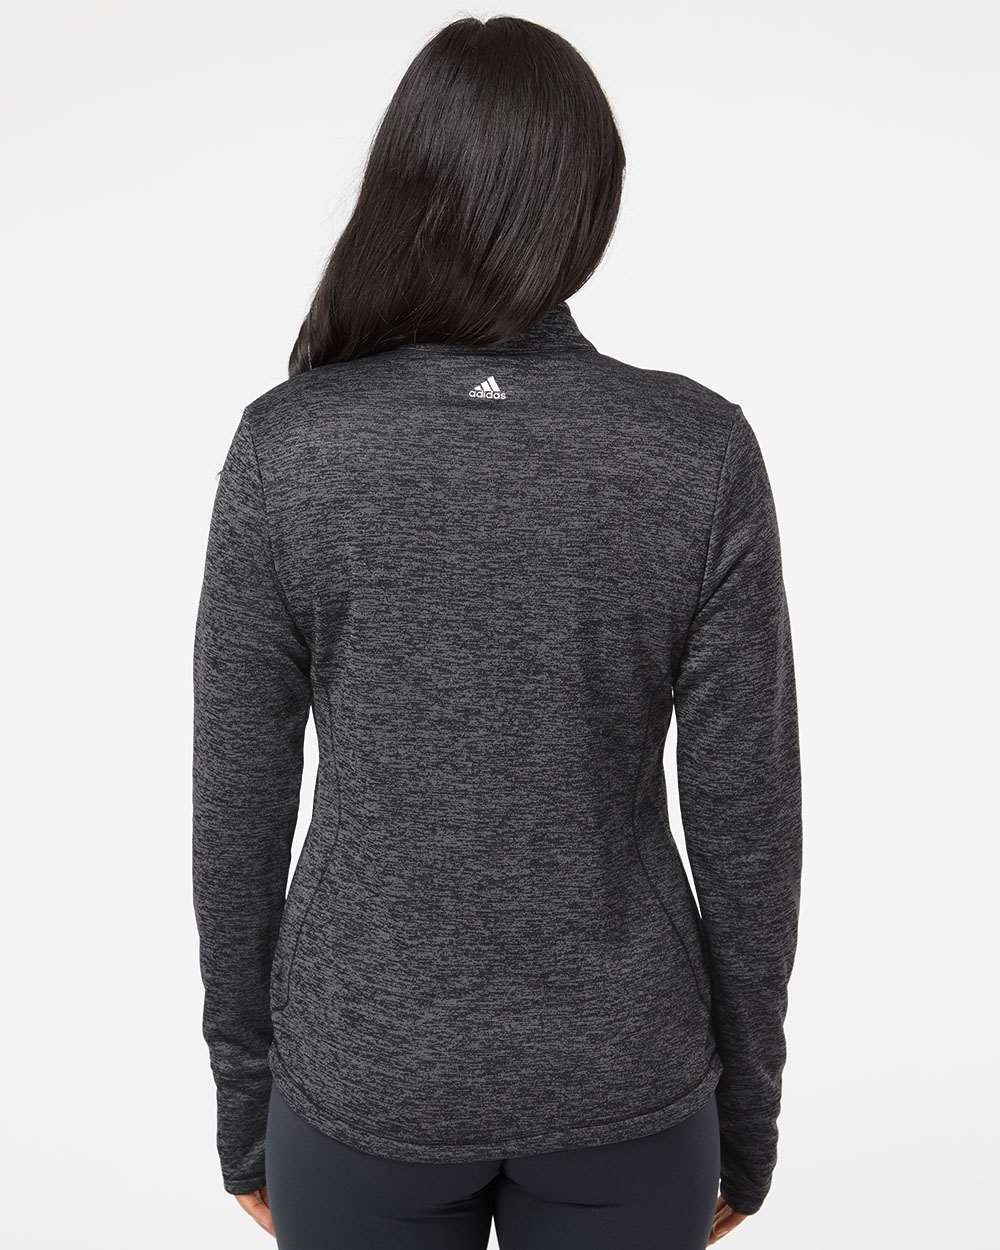 Adidas - Women's Brushed Terry Heathered Quarter-Zip Pullover - A285